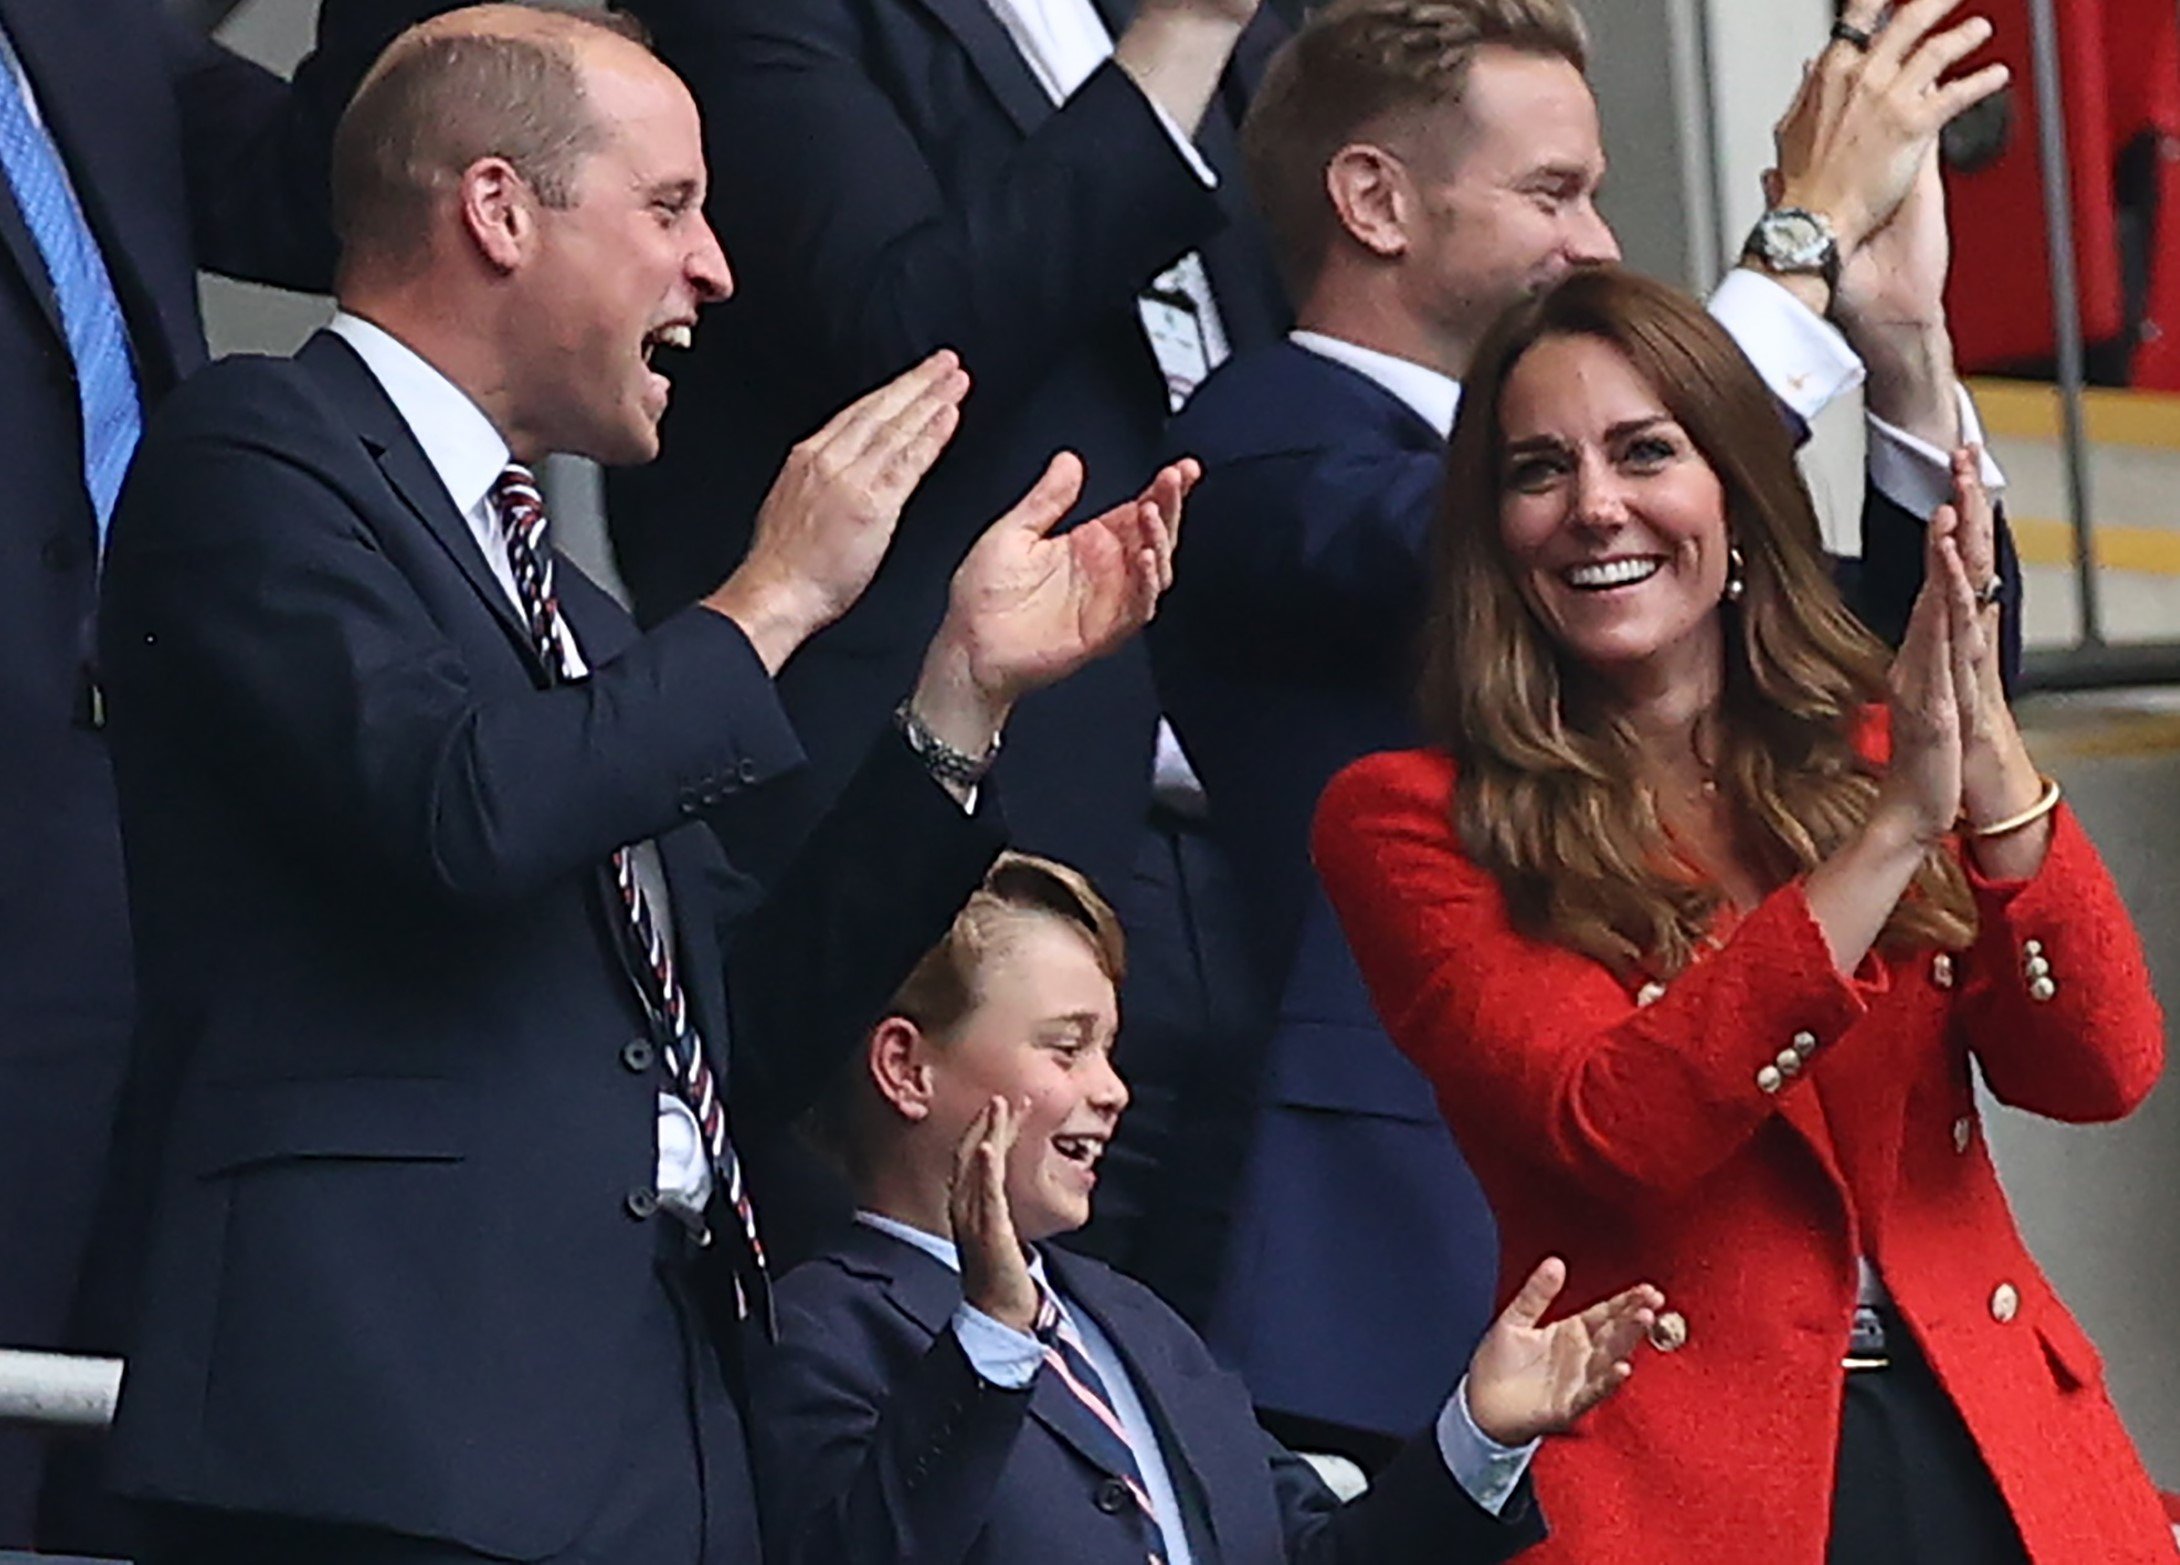 Prince William, Kate Middleton, and their son Prince George clapping and cheering during the Euro Cup